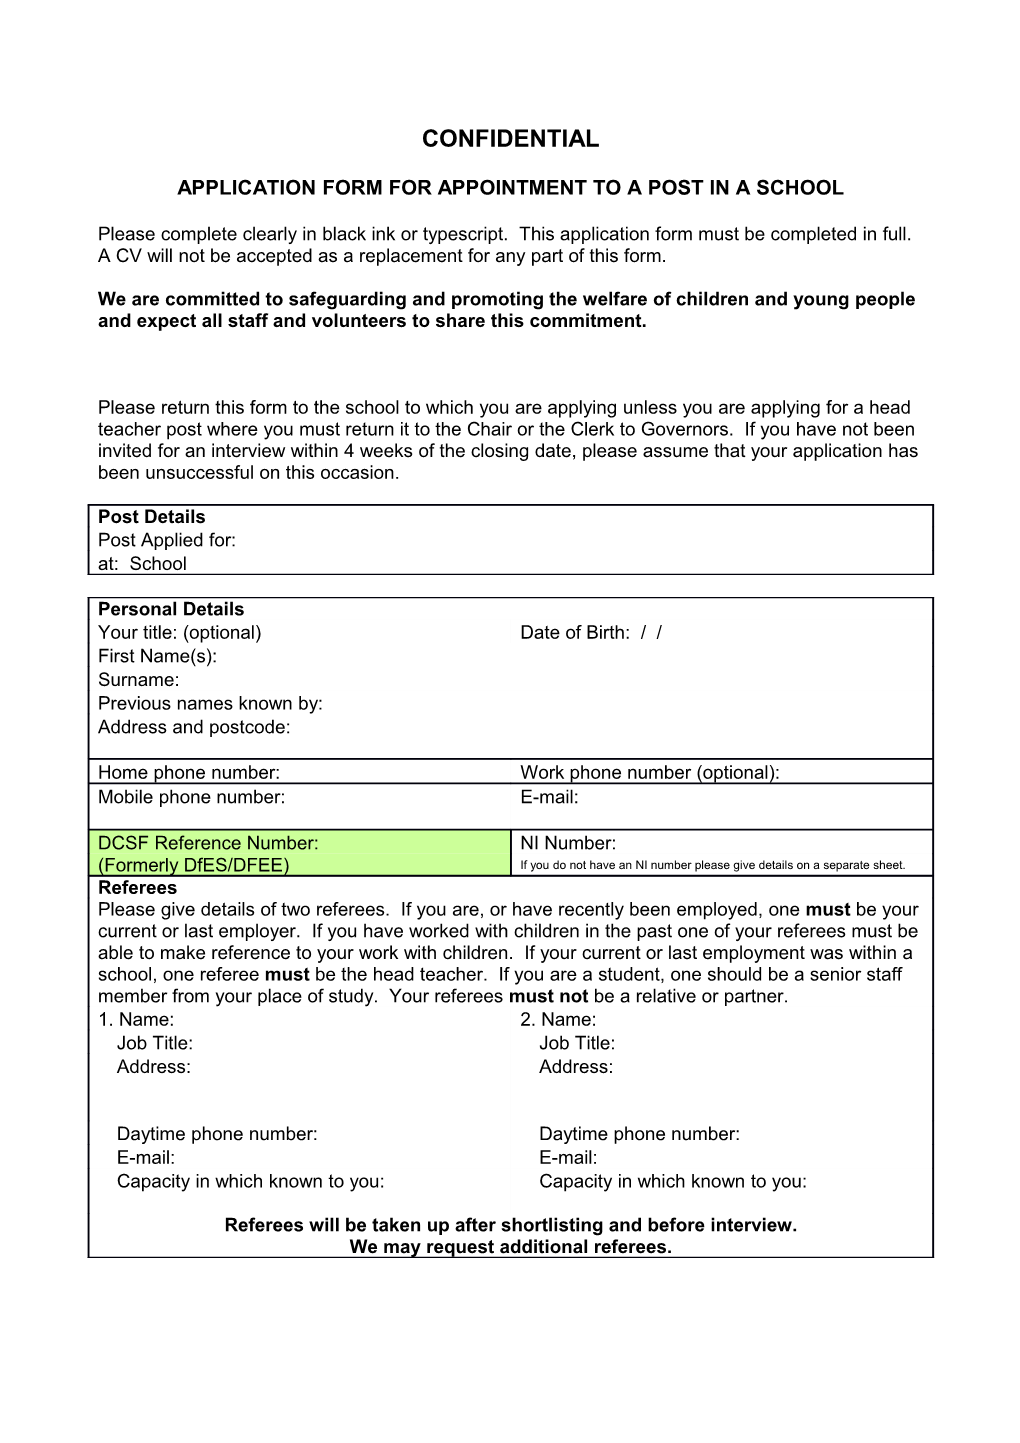 Application Form for Appointment to a Post in a School